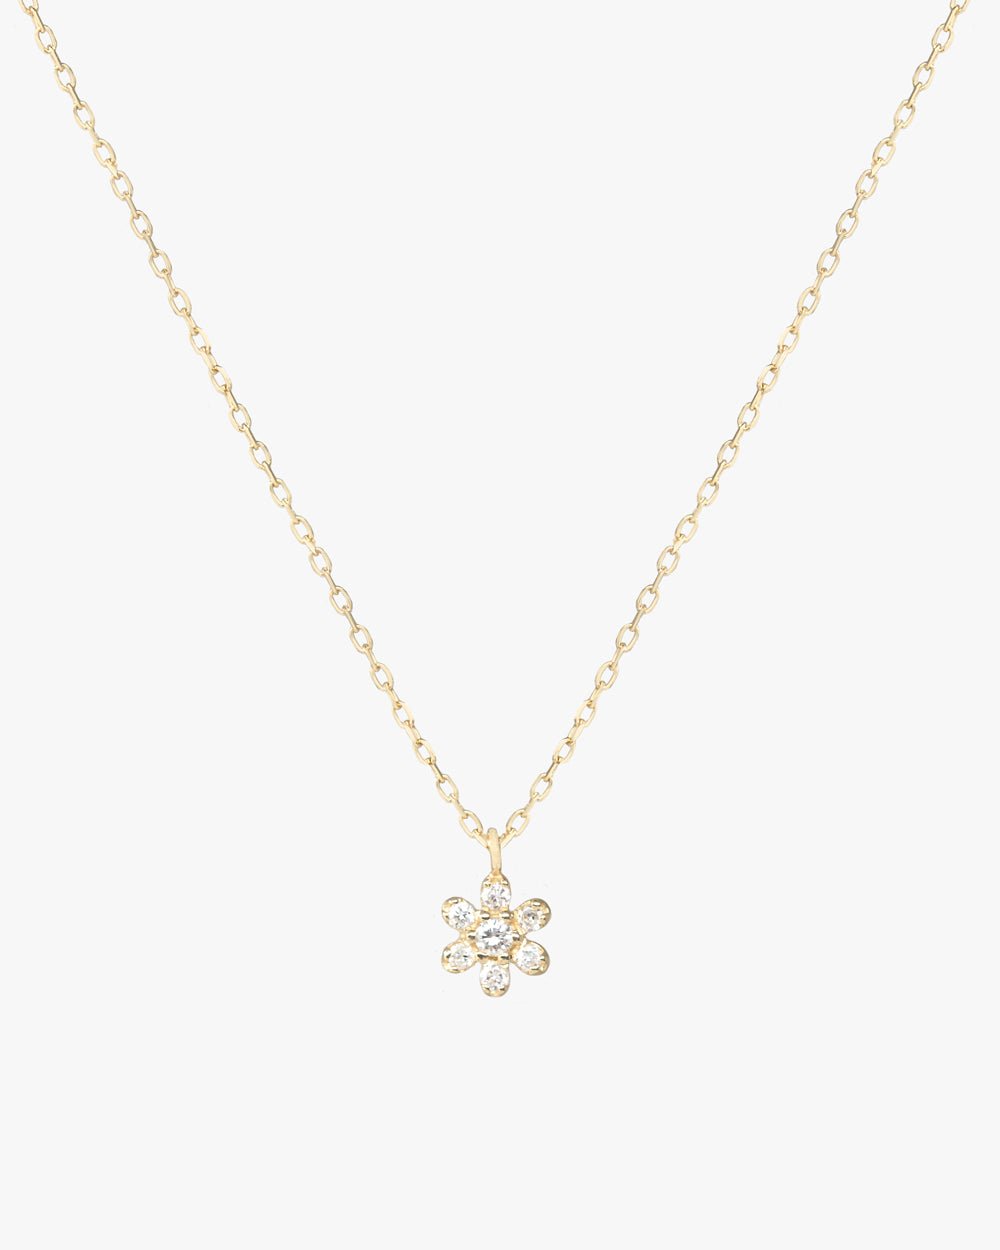 PROVENCE DIAMOND FLOWER NECKLACE - Shop Cupcakes and Cashmere